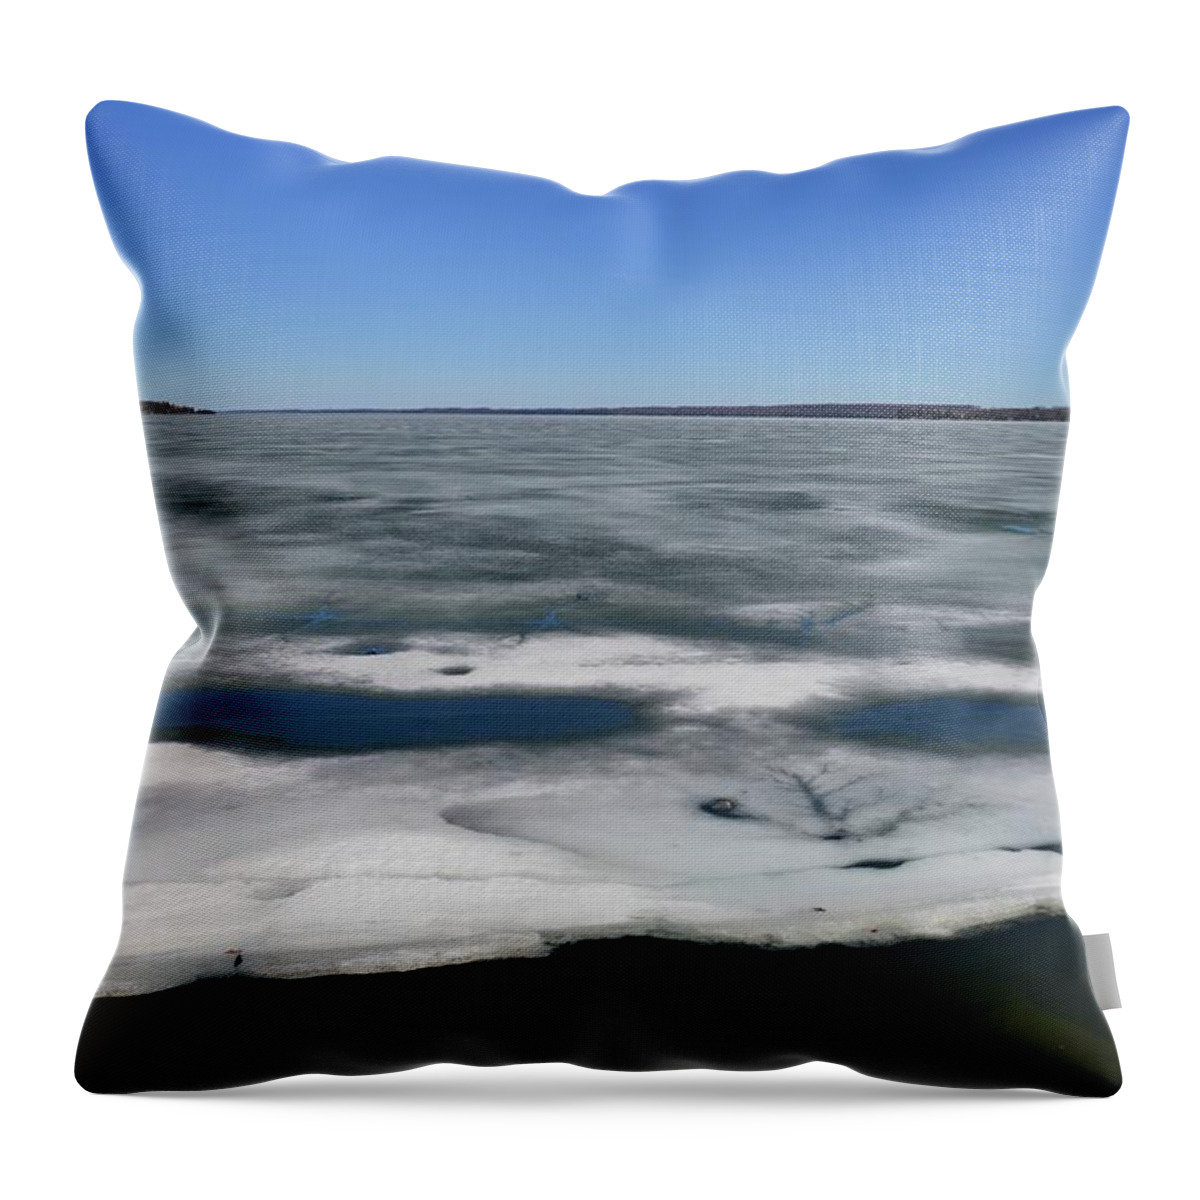 Abstract Throw Pillow featuring the photograph Beneath The Melting Ice by Lyle Crump